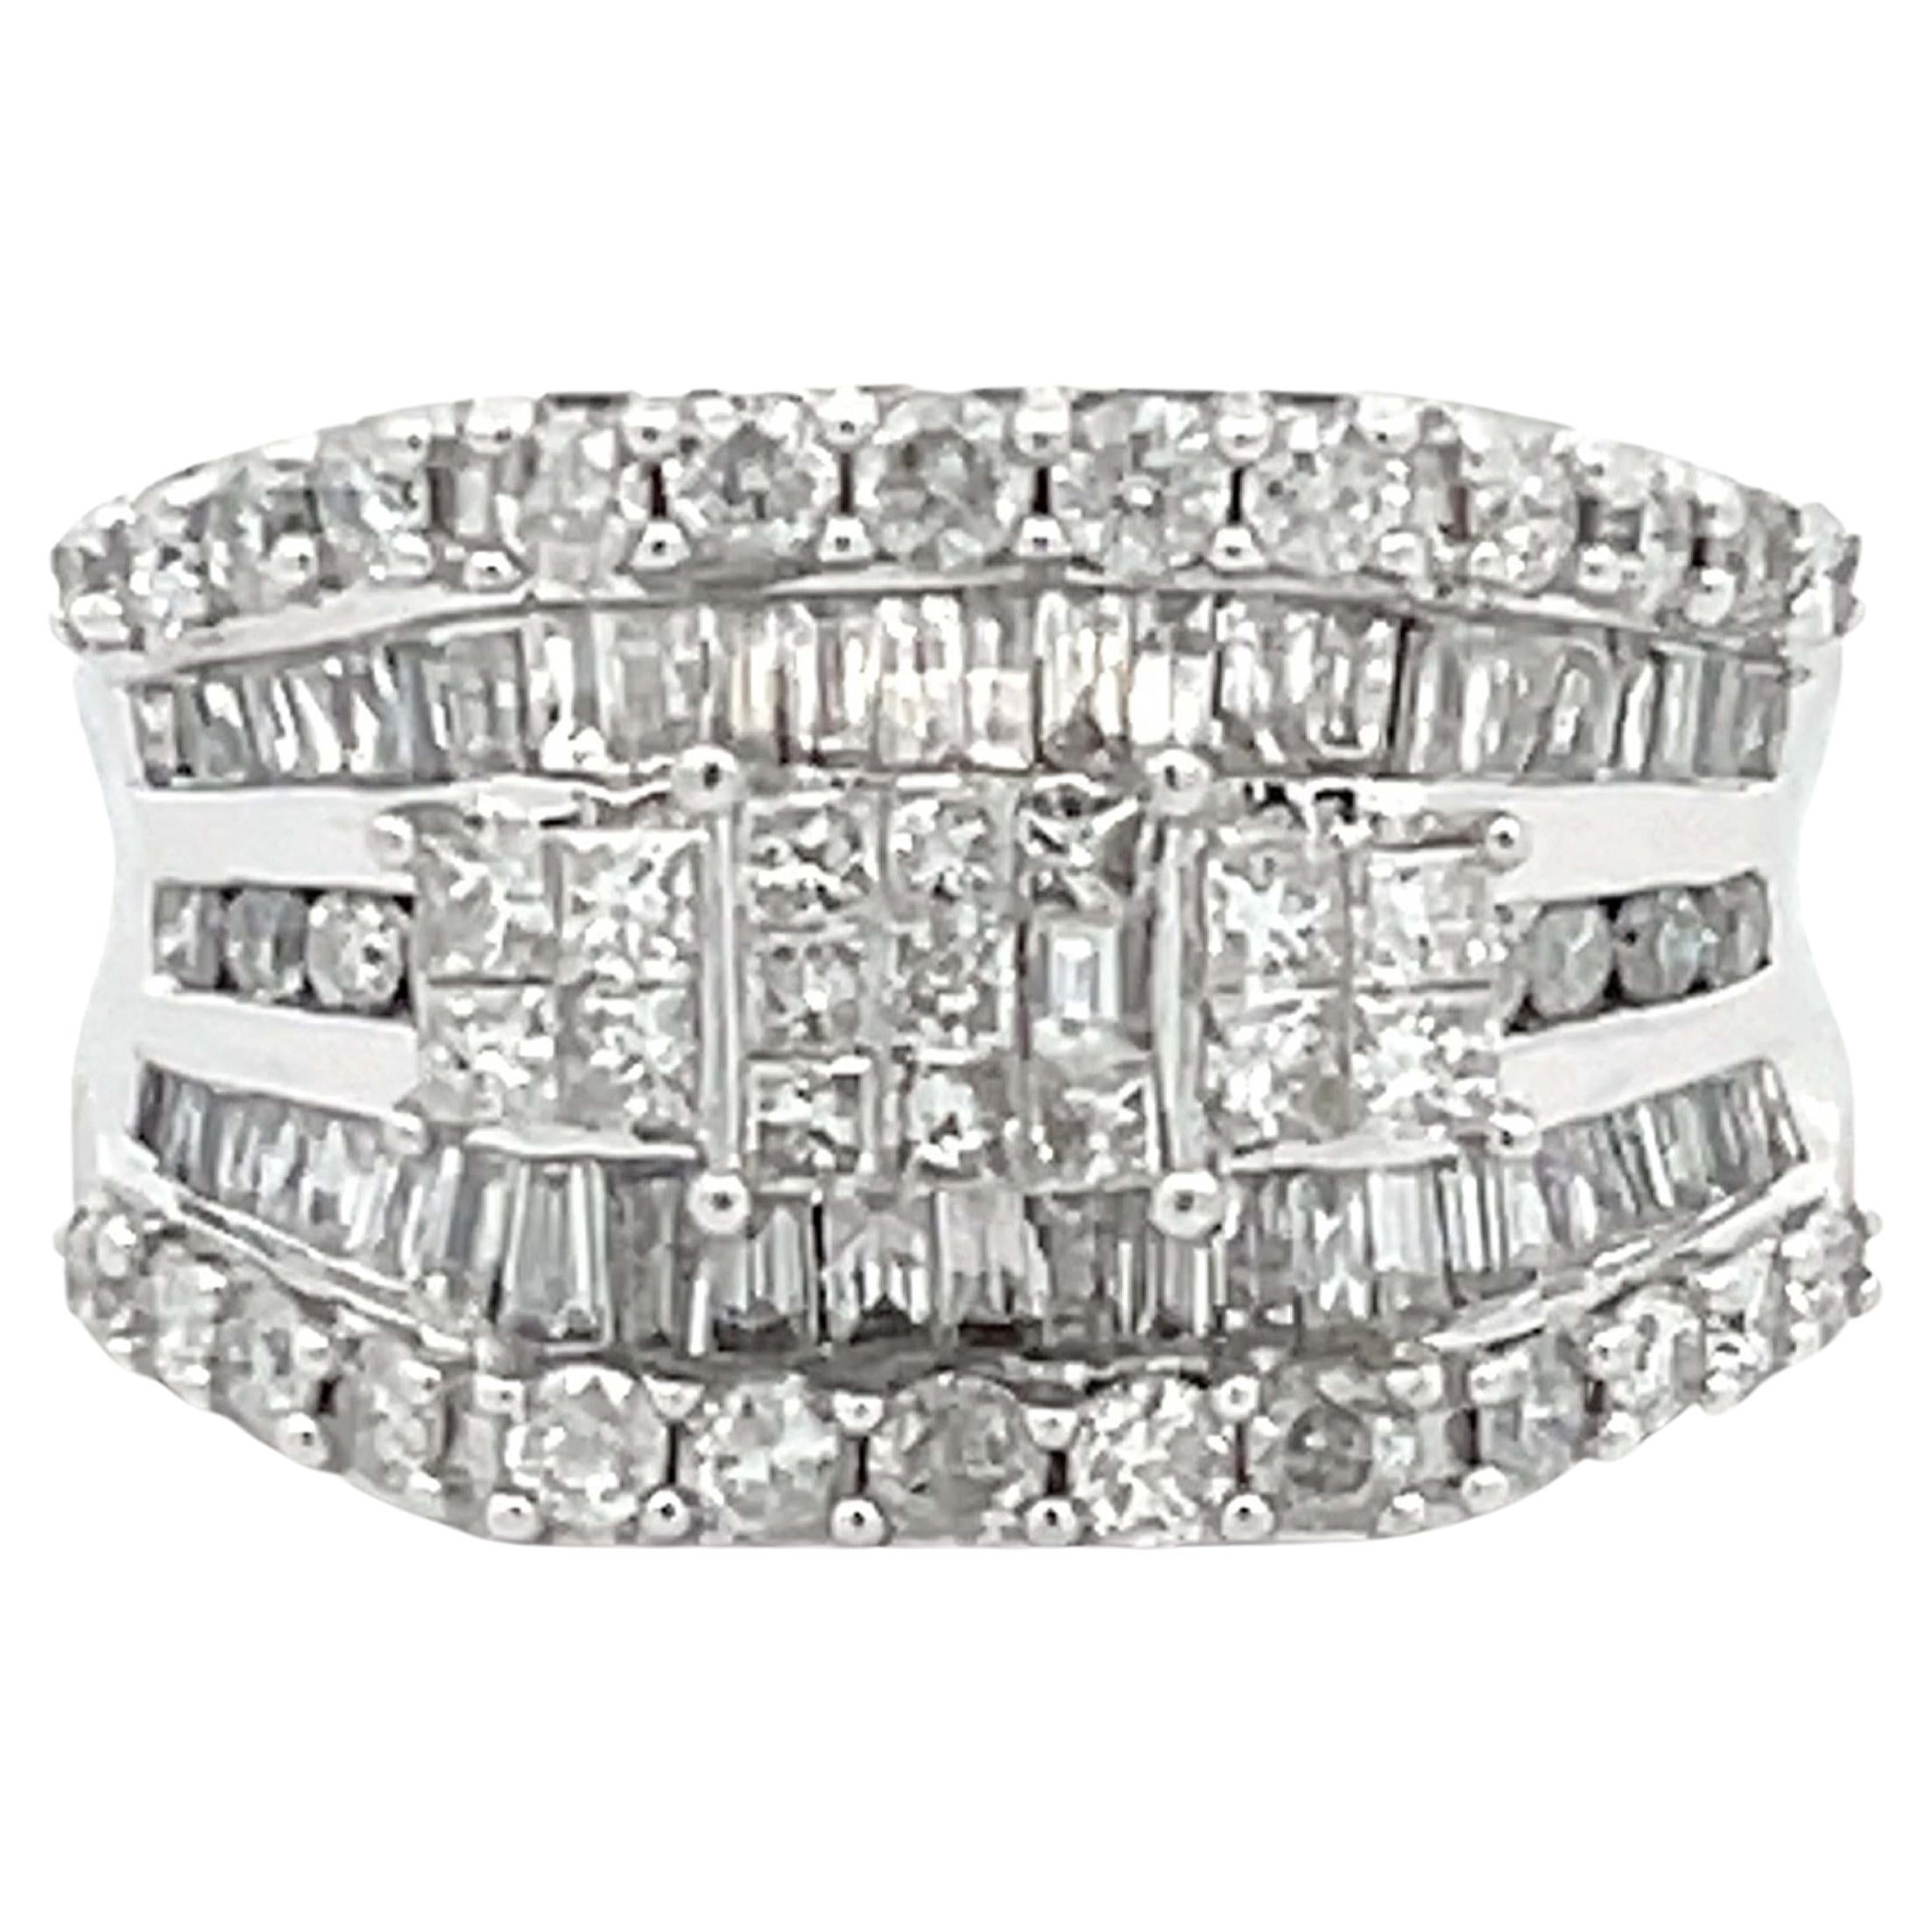 Large Baguette, Round and Princess Cut Diamond Ring in 14k White Gold